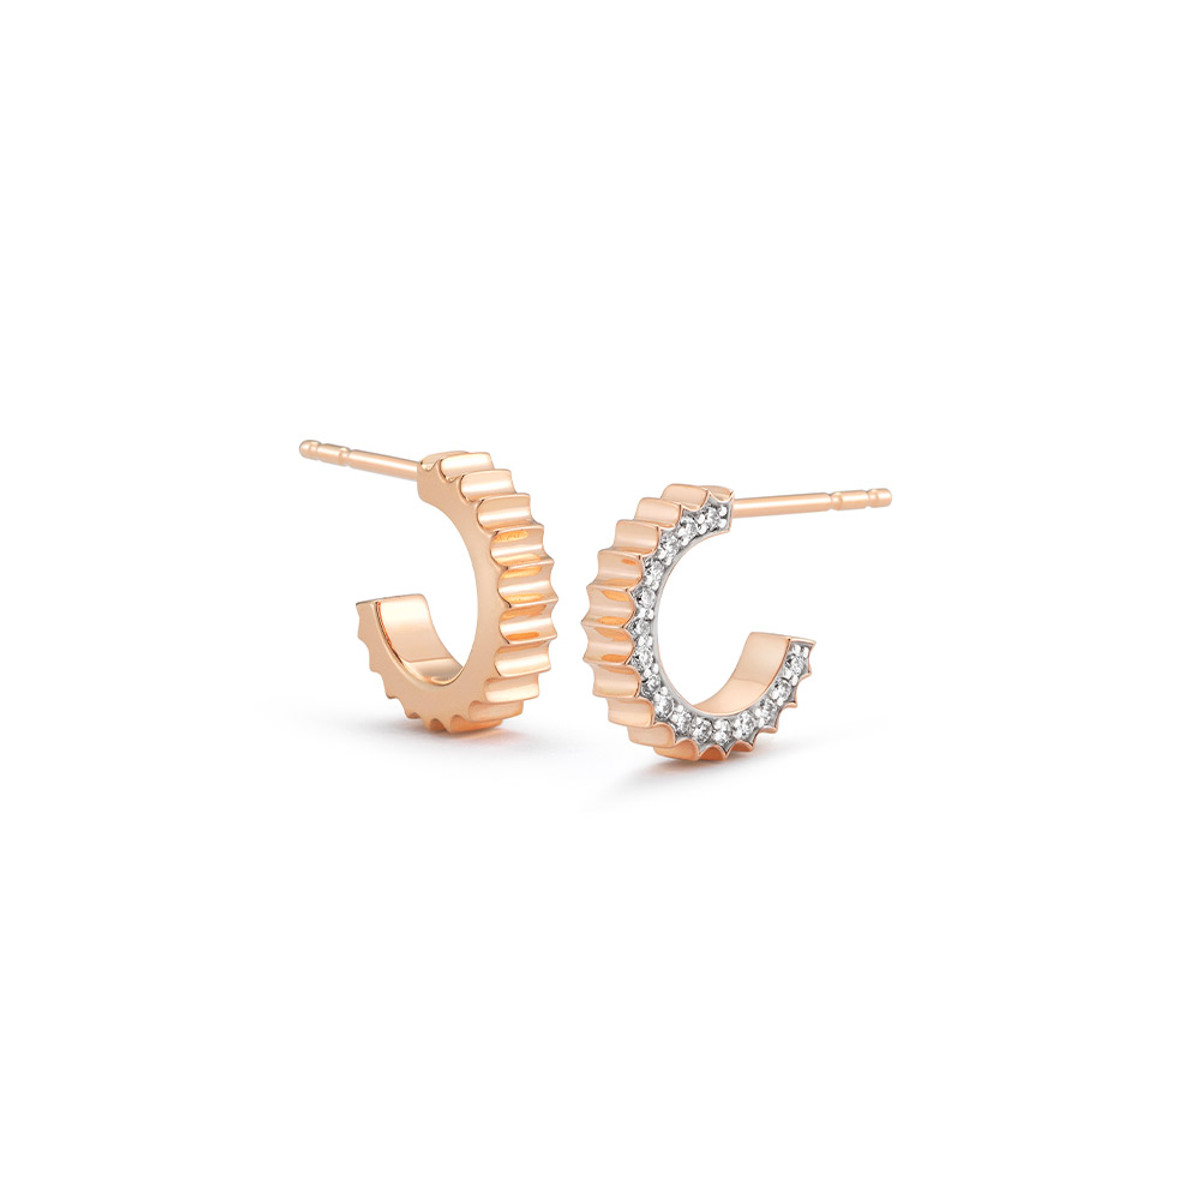 Walters Faith Clive 18K Rose Gold and Diamond Fluted Huggie Earrings-61718 Product Image